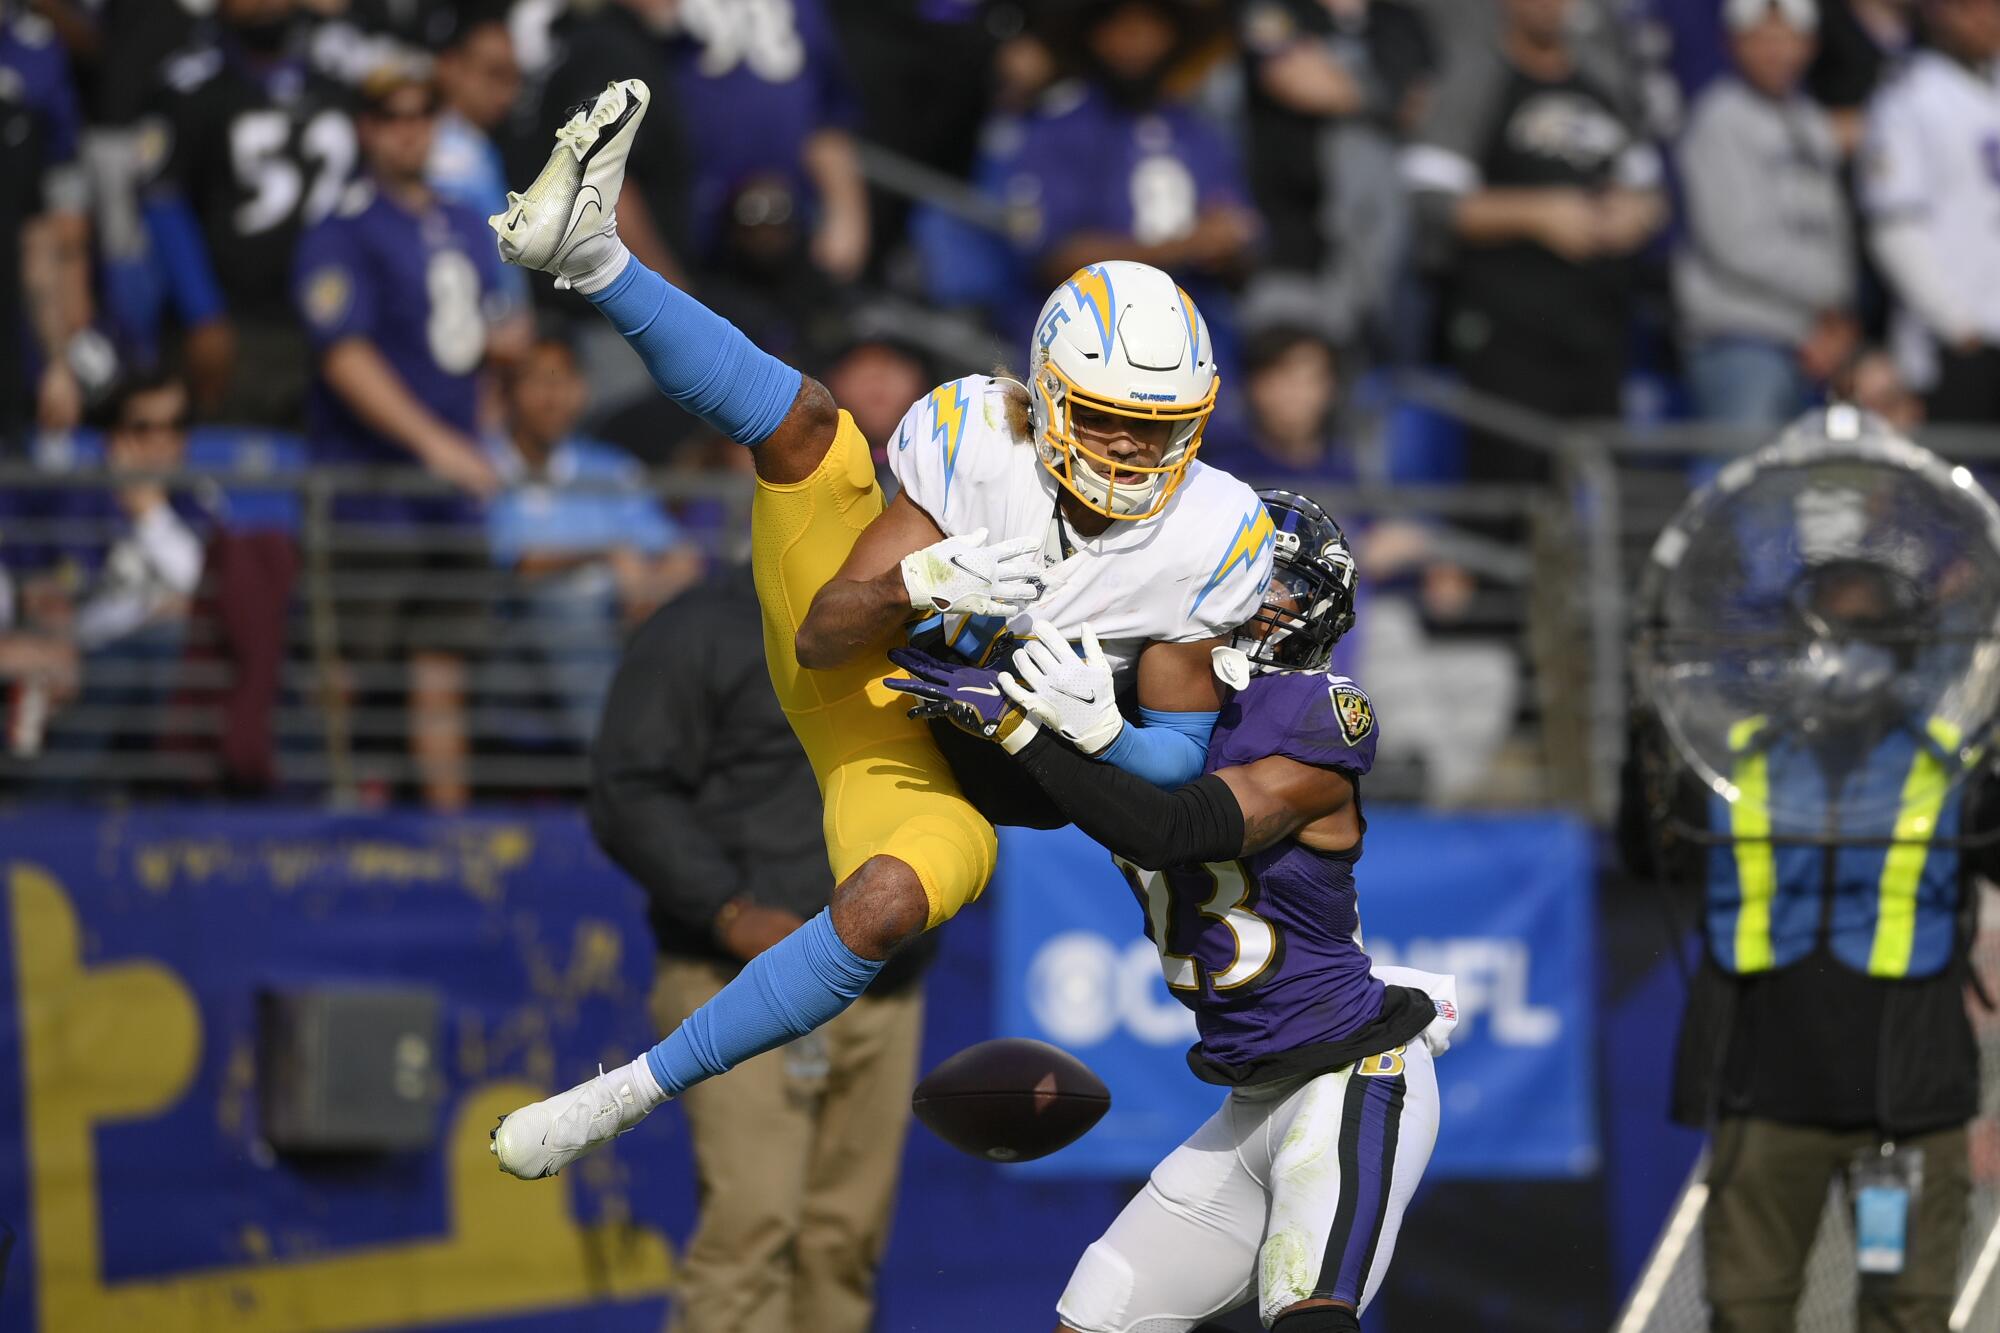 Baltimore Ravens cornerback Anthony Averett breaks up a pass intended for Chargers wide receiver Jalen Guyton.